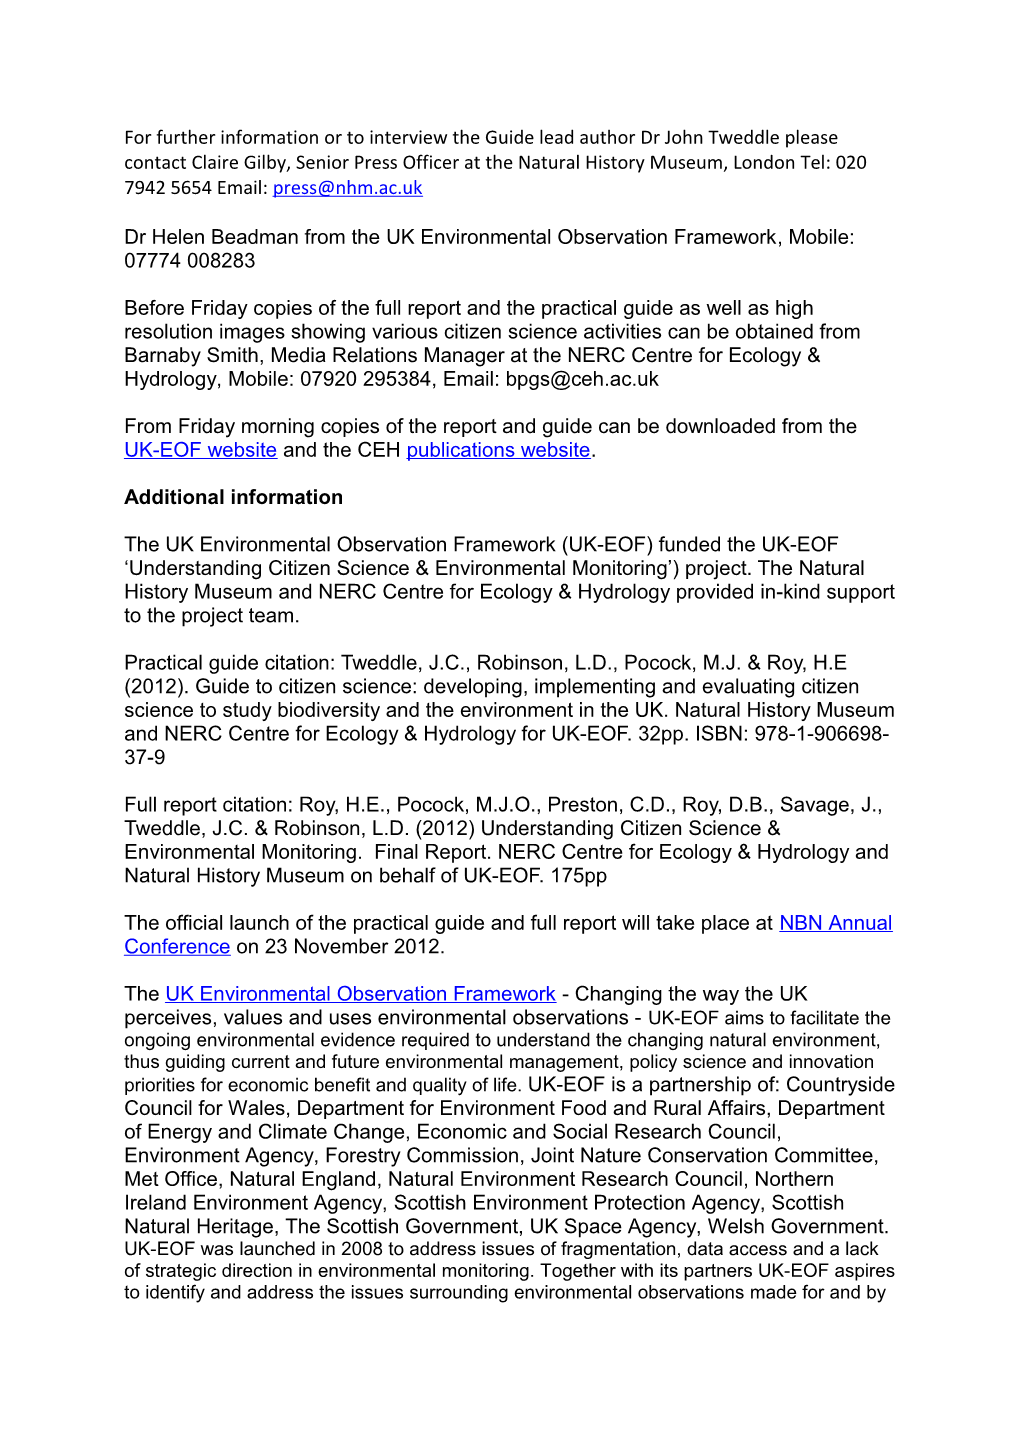 Press Release 2012/11 - Issued by the NERC Centre for Ecology & Hydrology, UK